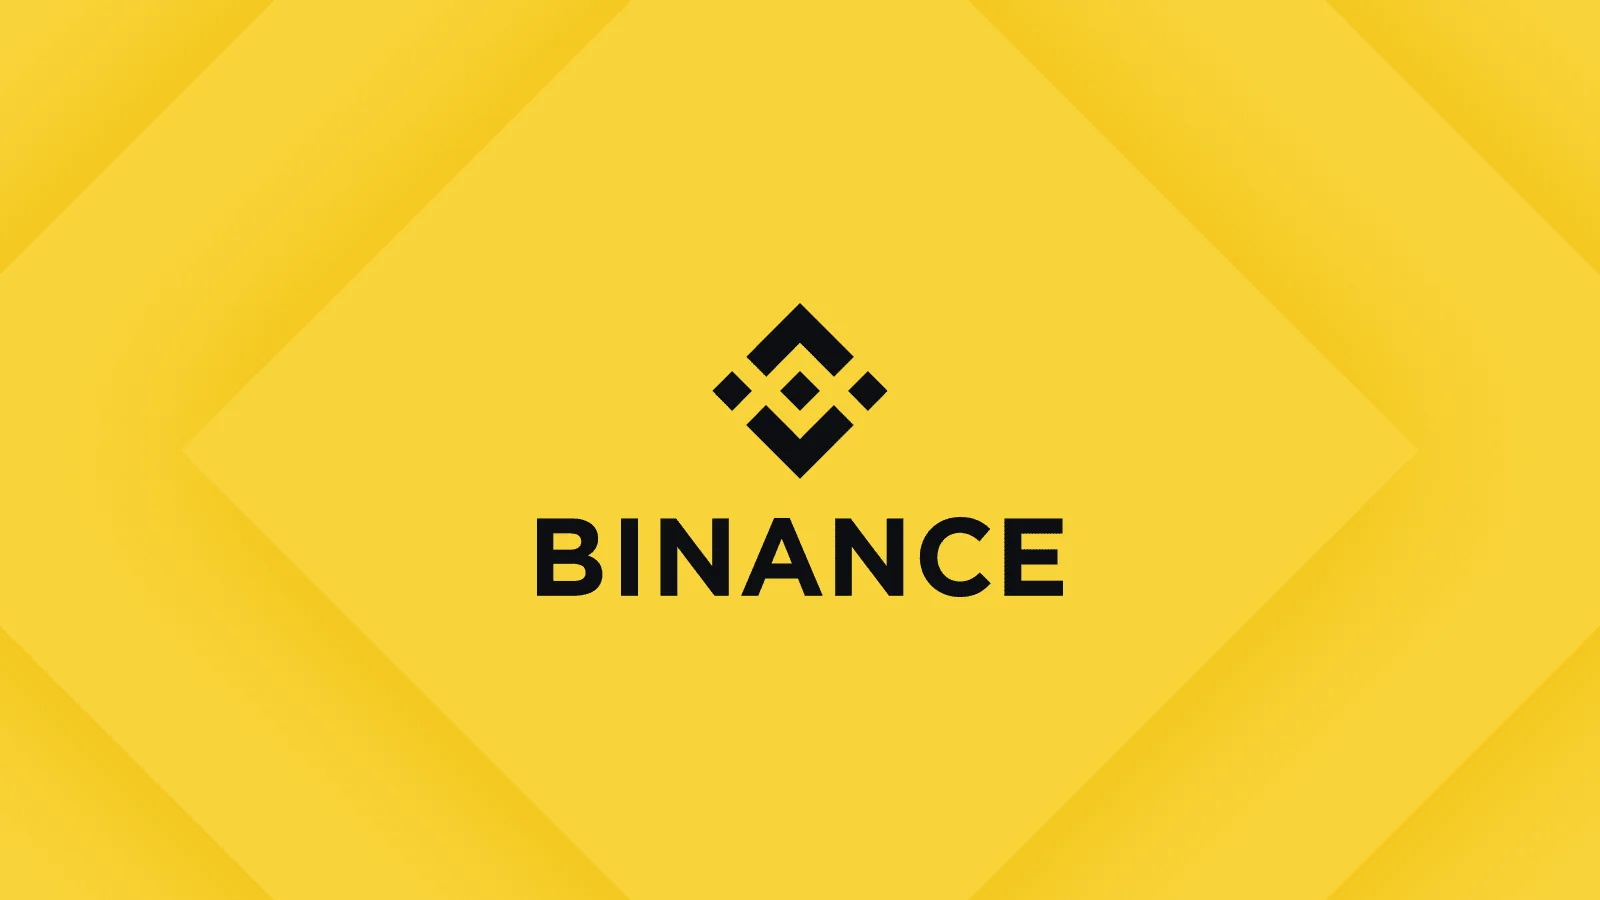 A Class-Action Lawsuit Filed Against Binance